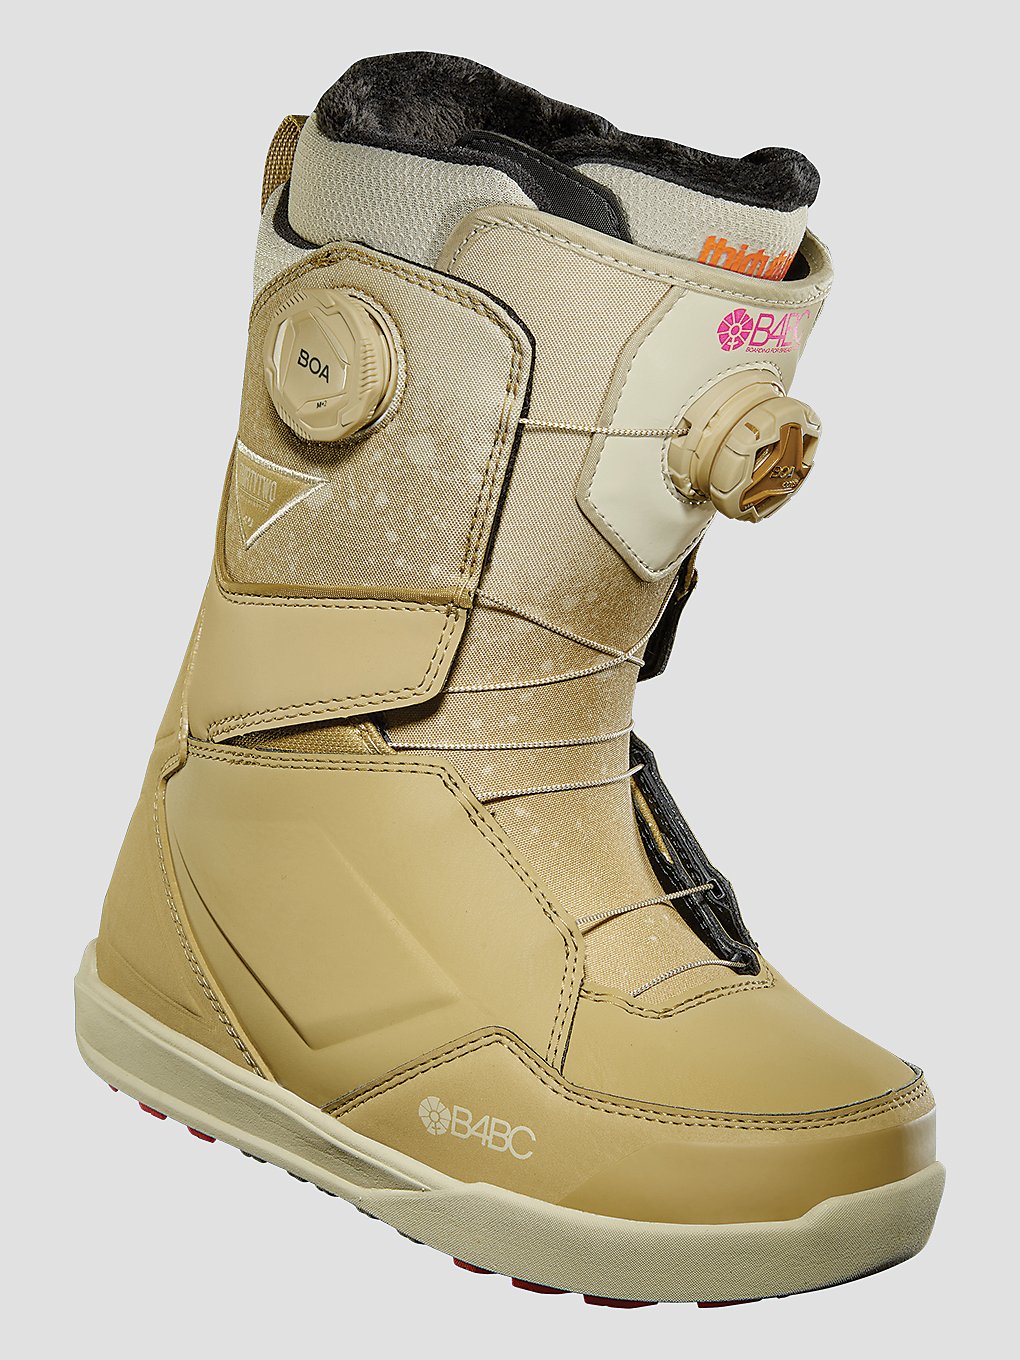 ThirtyTwo Lashed Double Boa B4Bc 2024 Snowboard-Boots tan kaufen